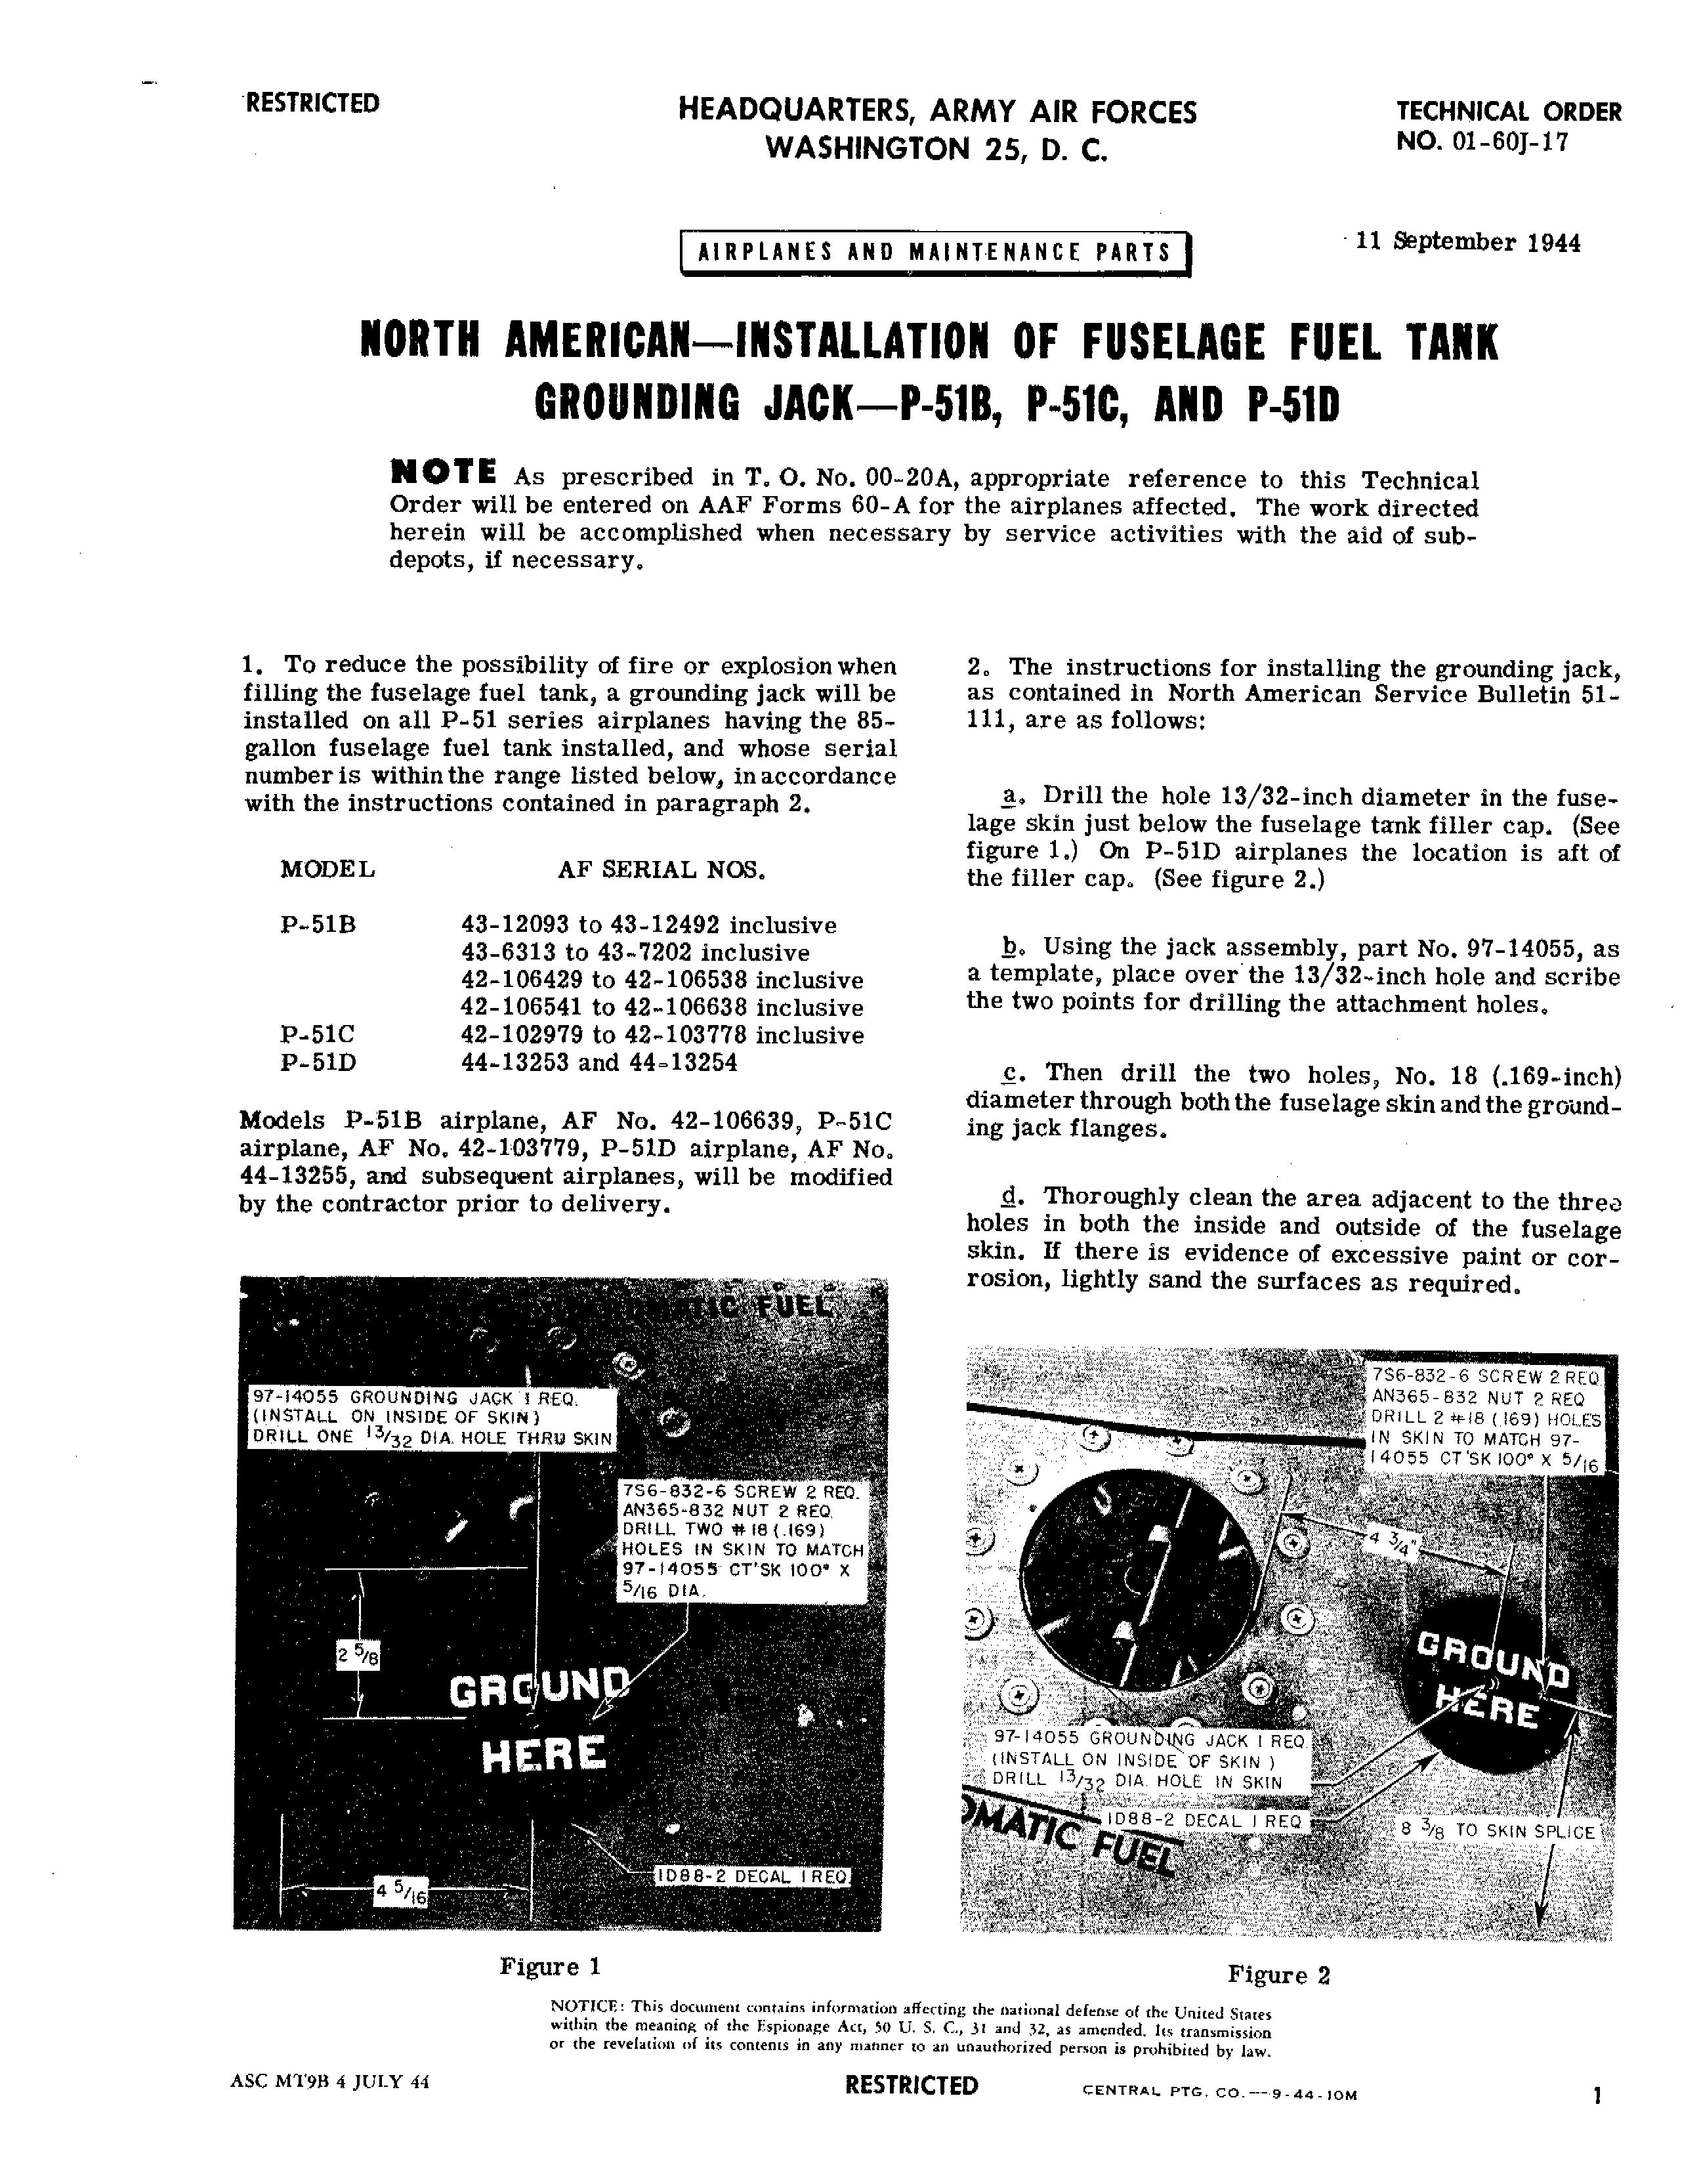 Sample page 1 from AirCorps Library document: Installation of Fuselage Fuel Tank Grounding Jack for P-51B, C, and D